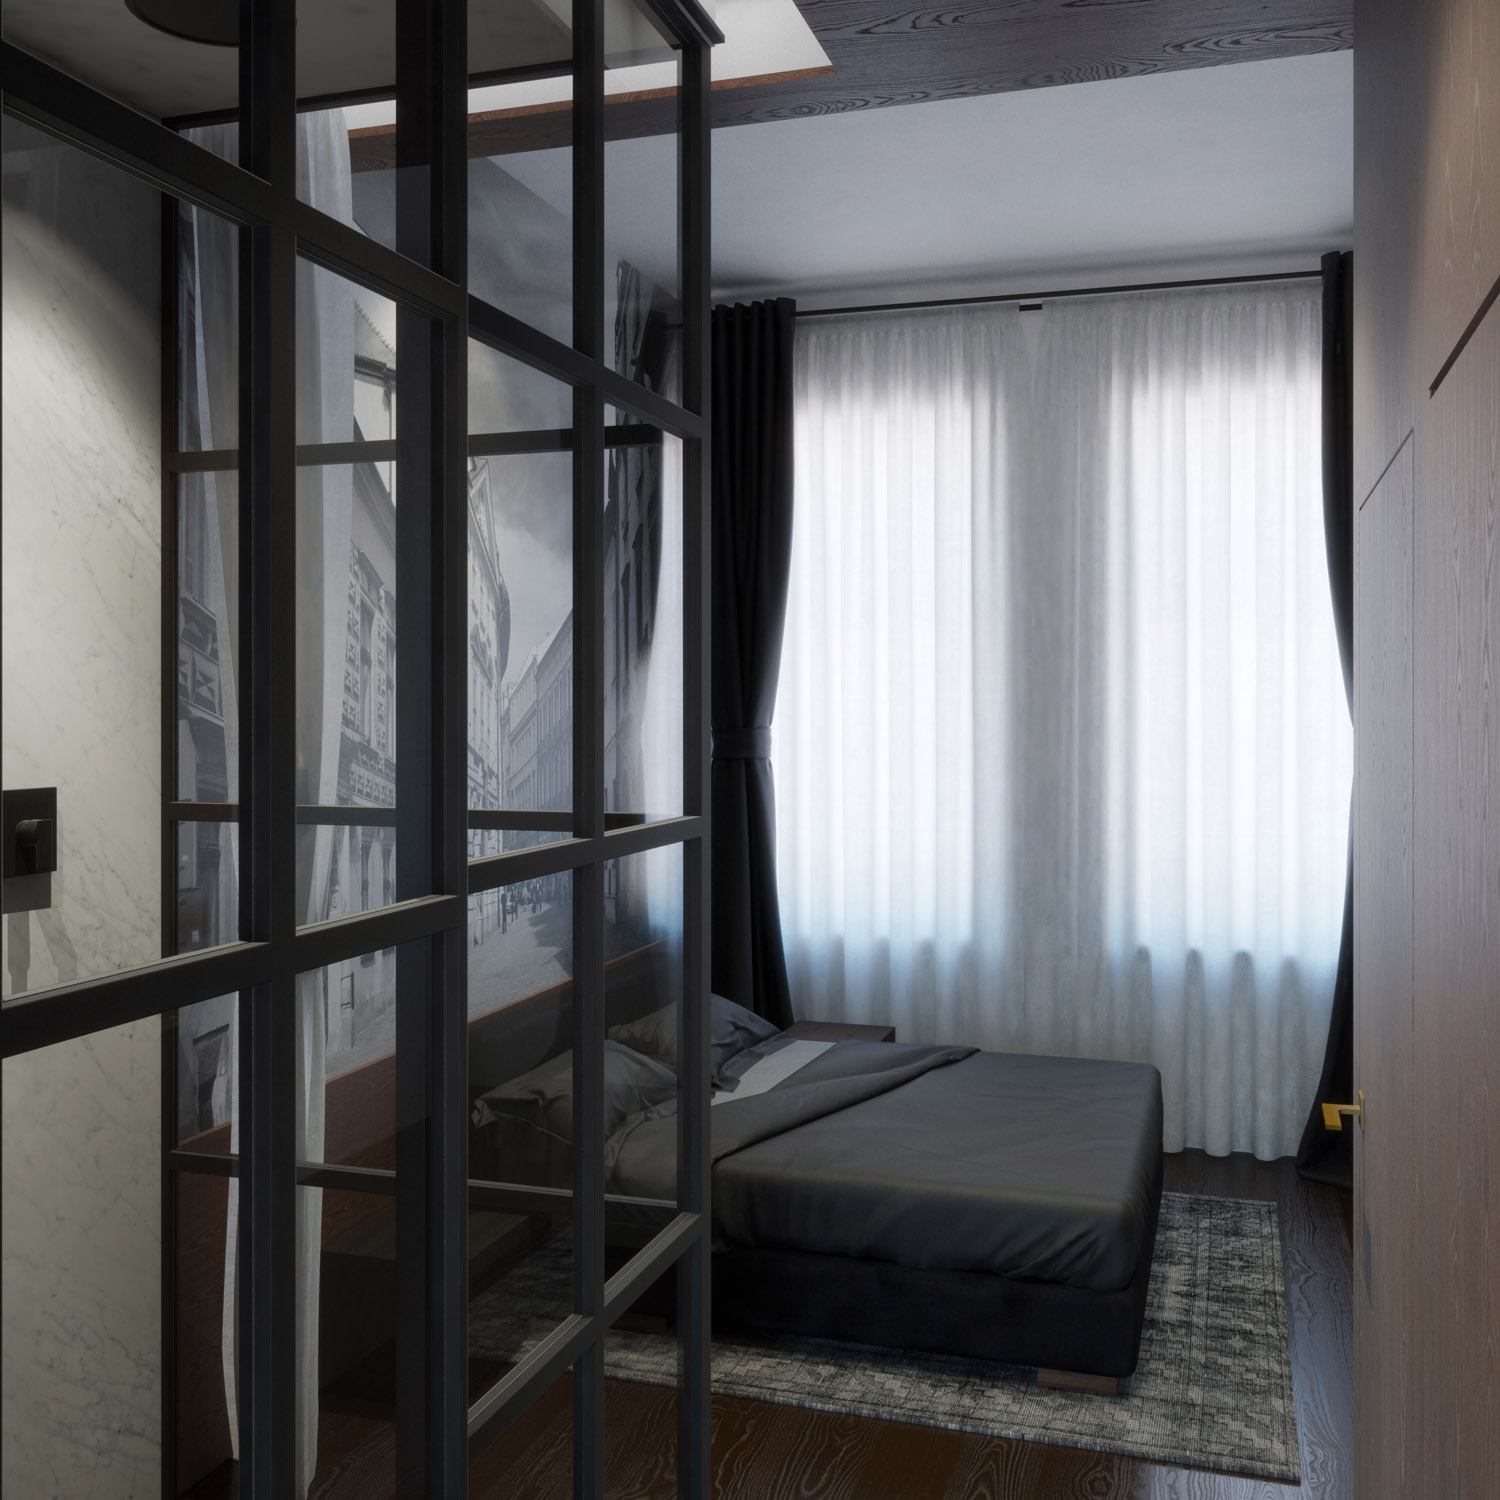 Hotel room in black and white - 3D visualization